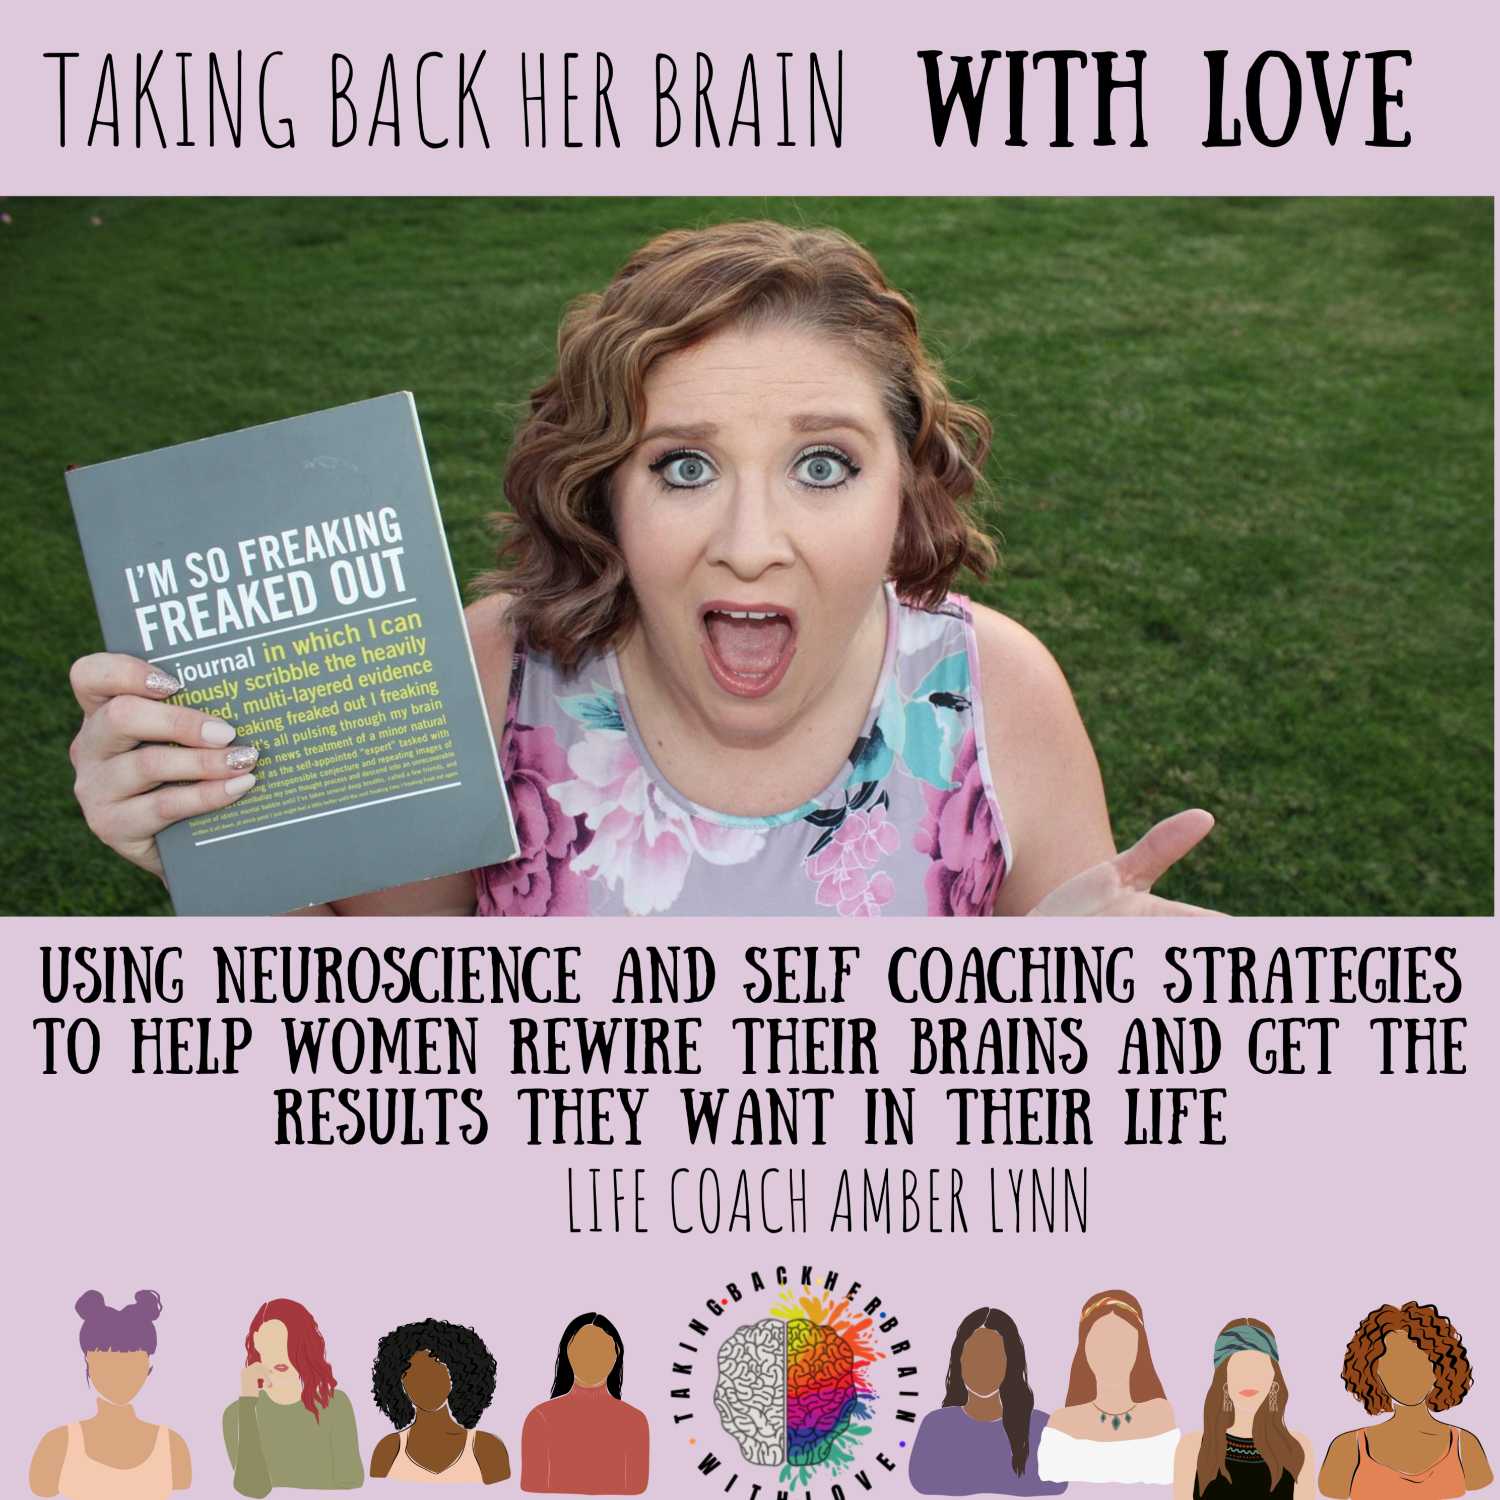 Taking Back Her Brain from the Manual for Others